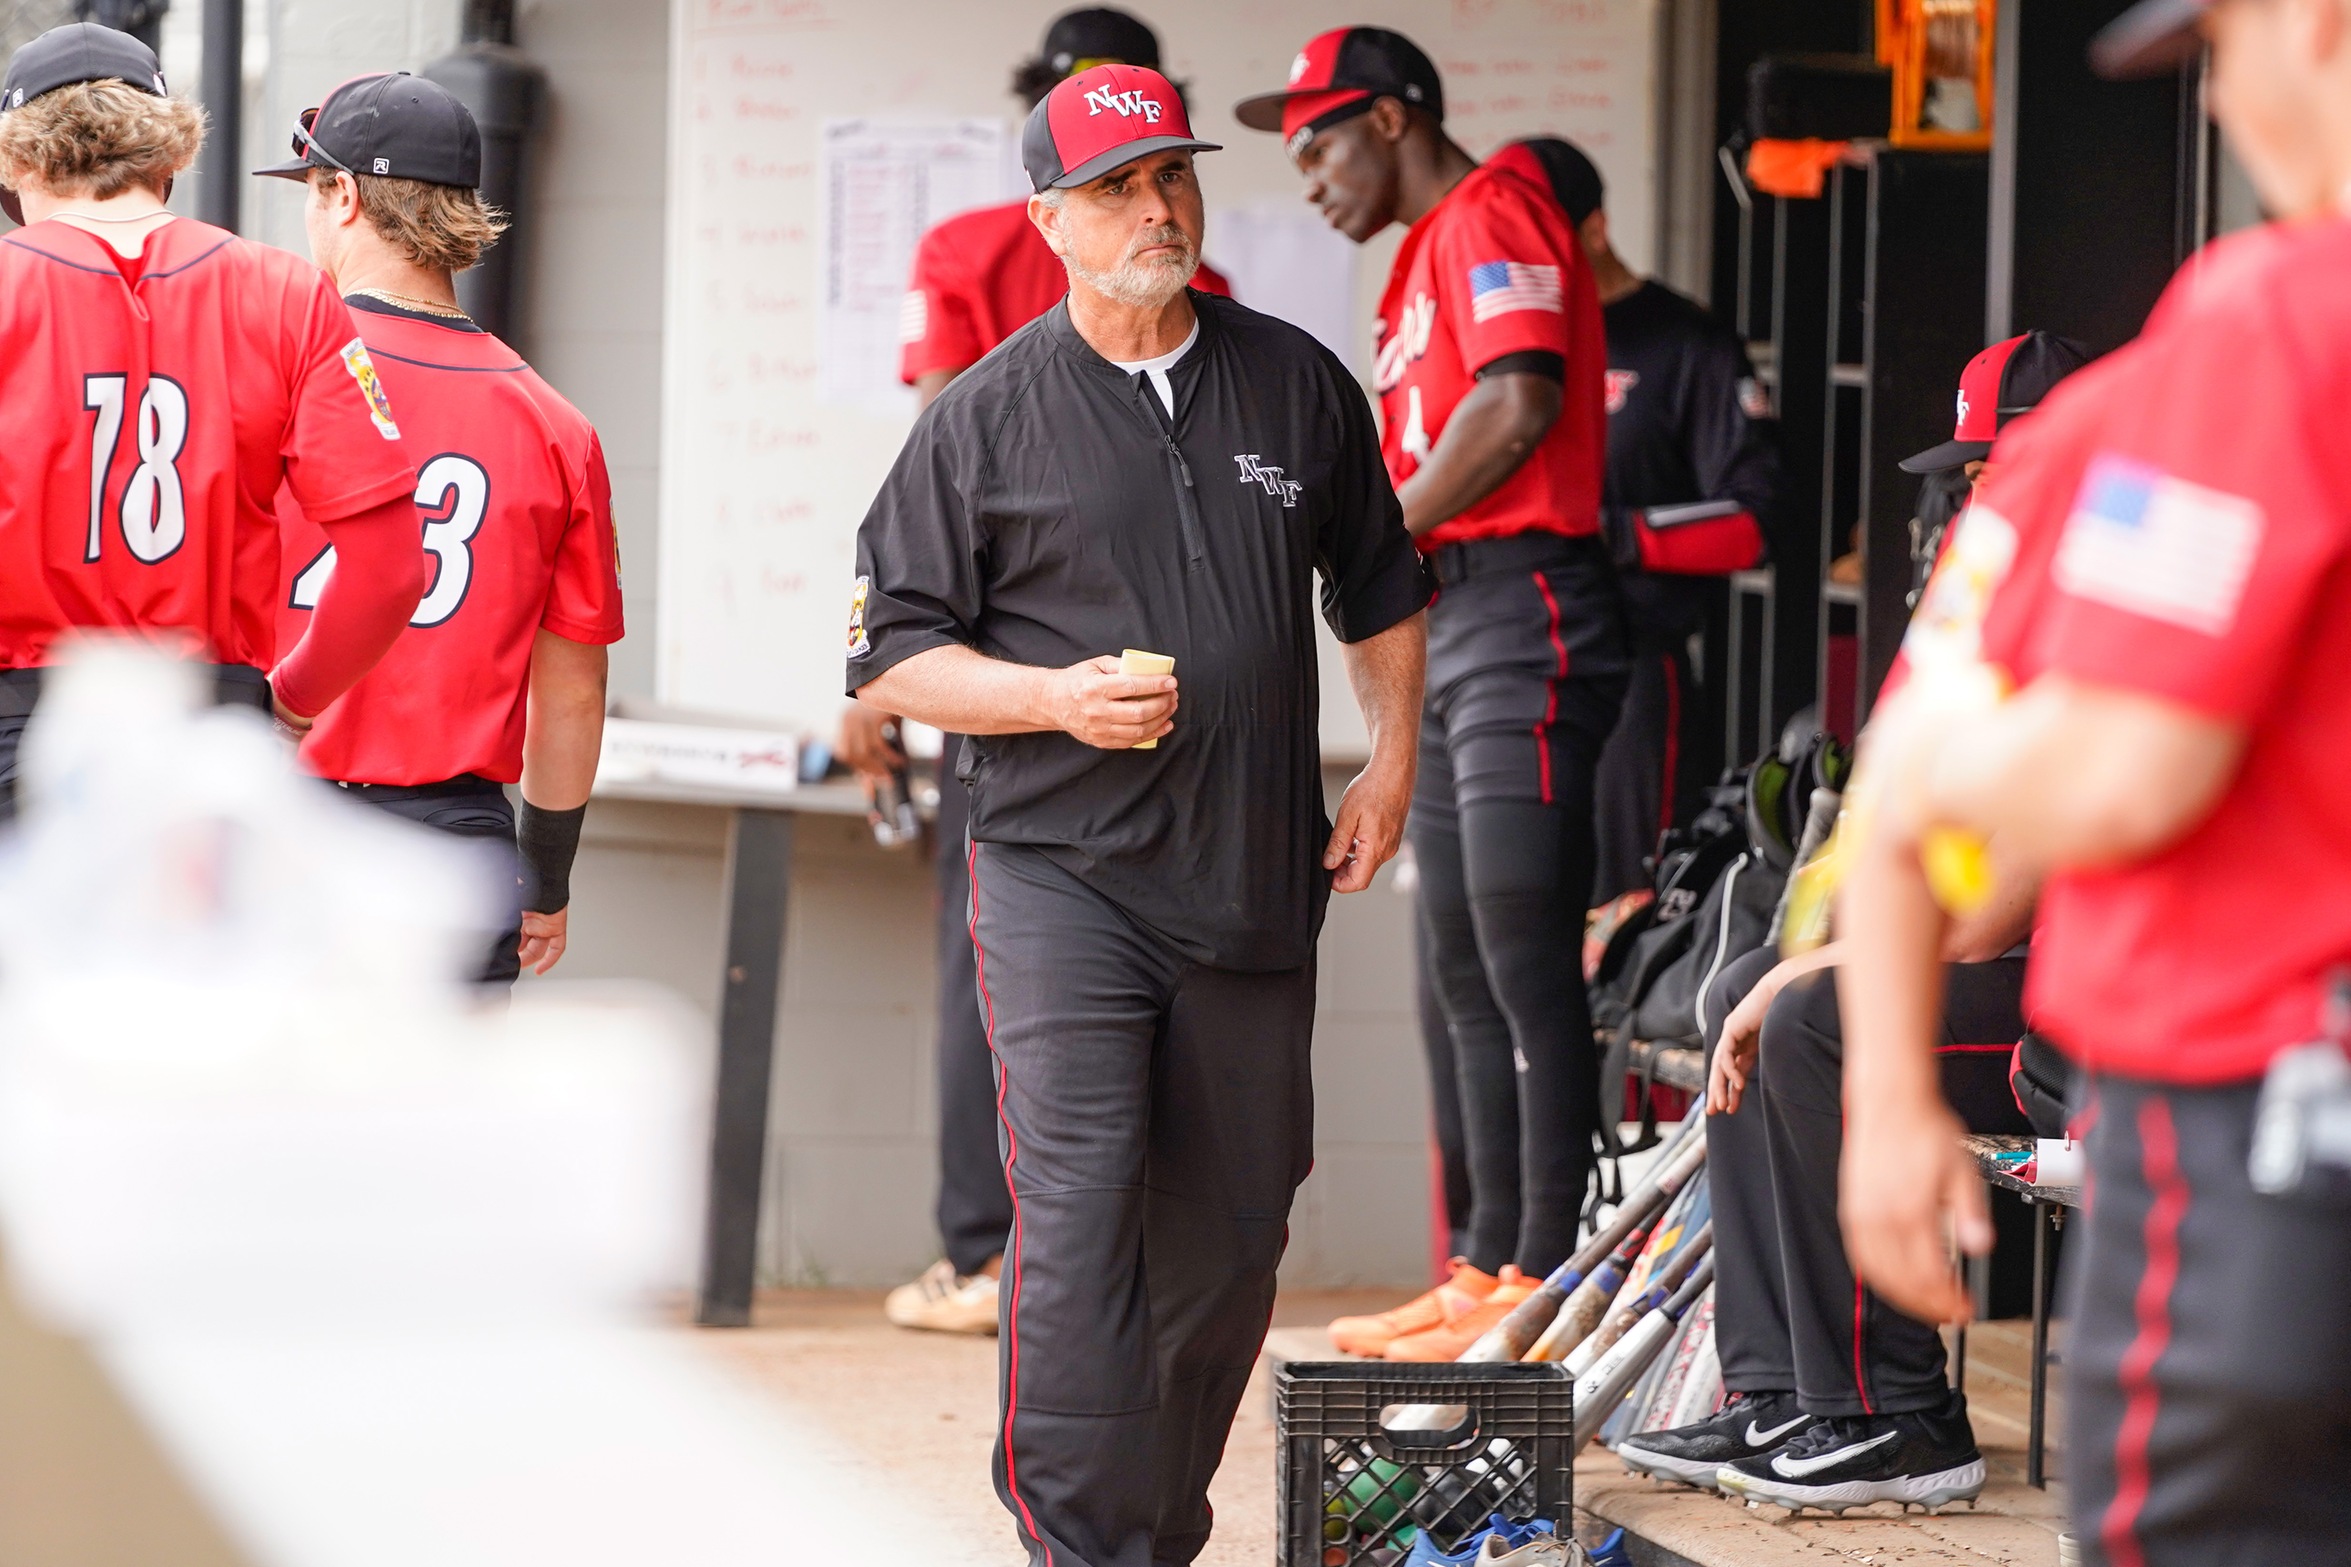 NWF Splits Doubleheader With Tallahassee; Coach Martin Secures 500th Career Win